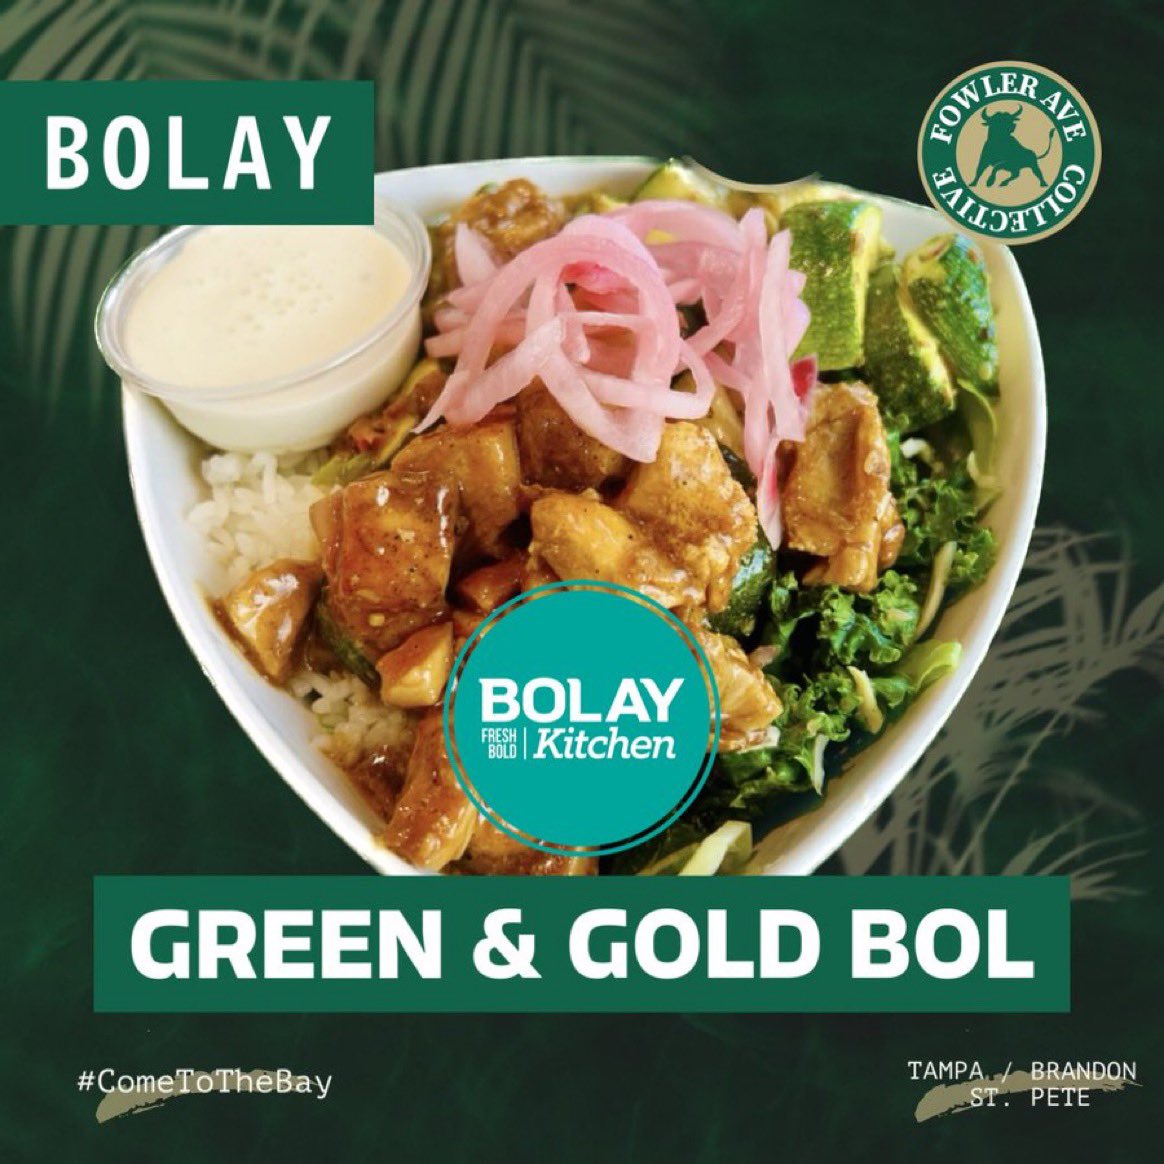 Wassup Bulls fans! go stop by one of the three Tampa area @Bolay locations and pick up a Green & Gold BOL! $1 from each G&G BOL sold goes back to help fund the USF NIL Fund through @FowlerAvenue #WARDADDY